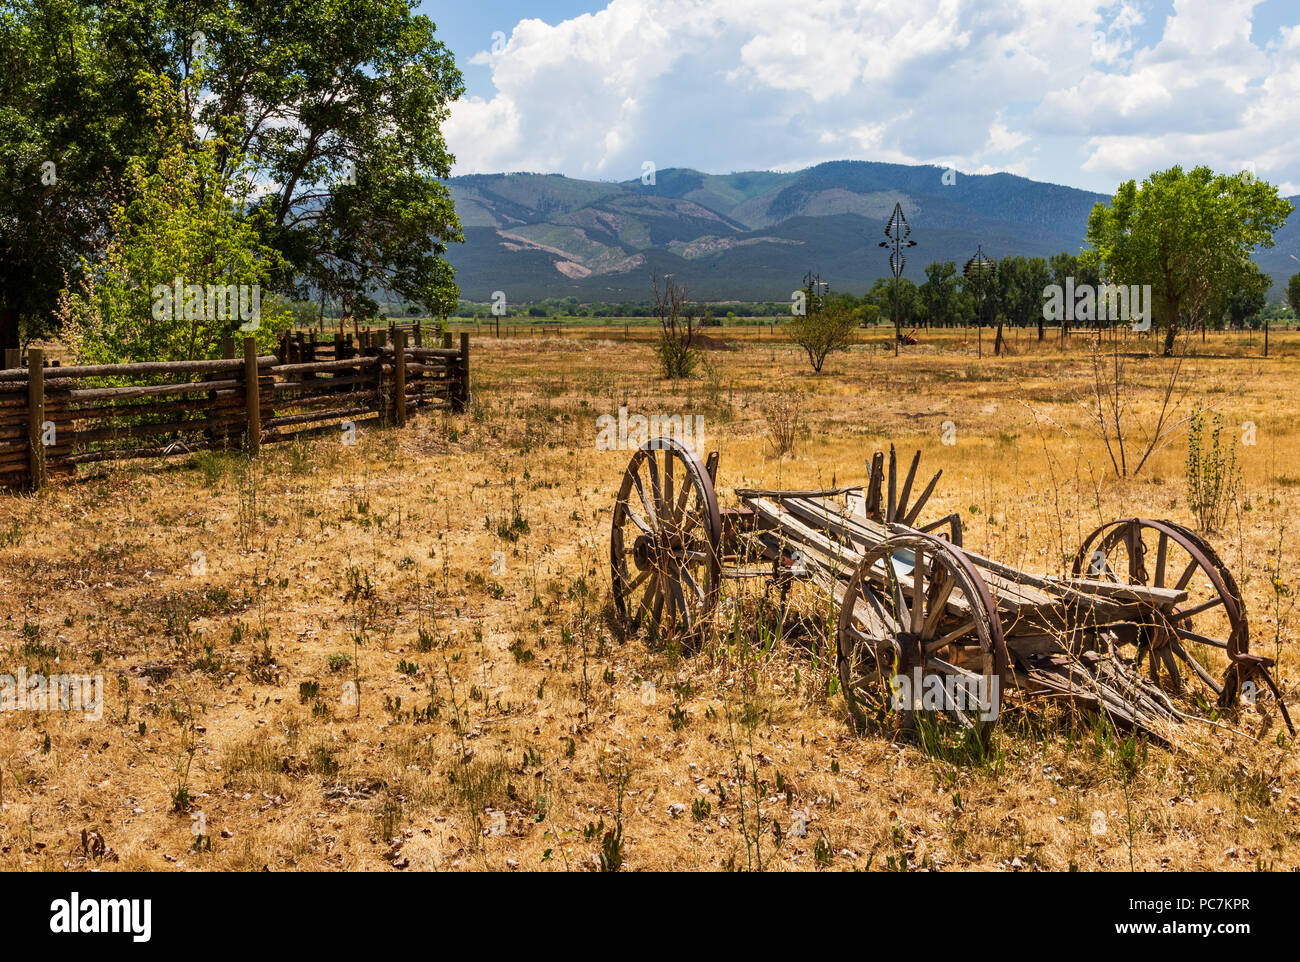 TAOS, NM, USA-8 JULY  18: An ancient, deteriorating wagon with wood spokes and metal rims sits abandoned in a field beside Overland Sheepskin Ranch. Stock Photo